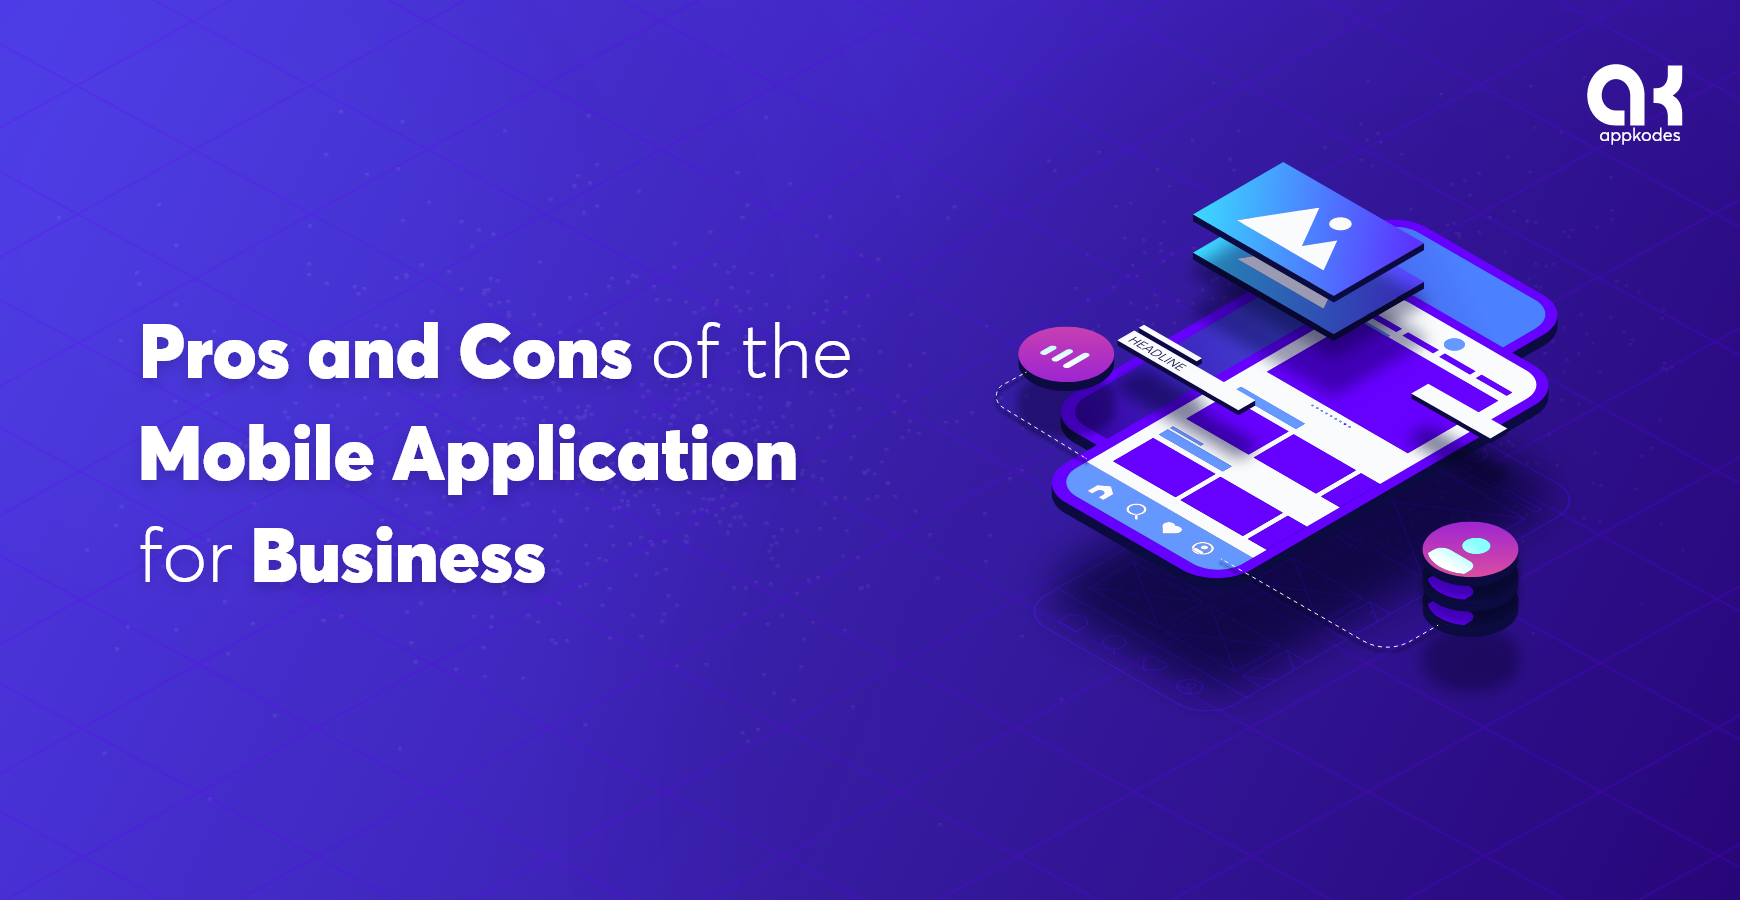 Pros and cons of the mobile application for business